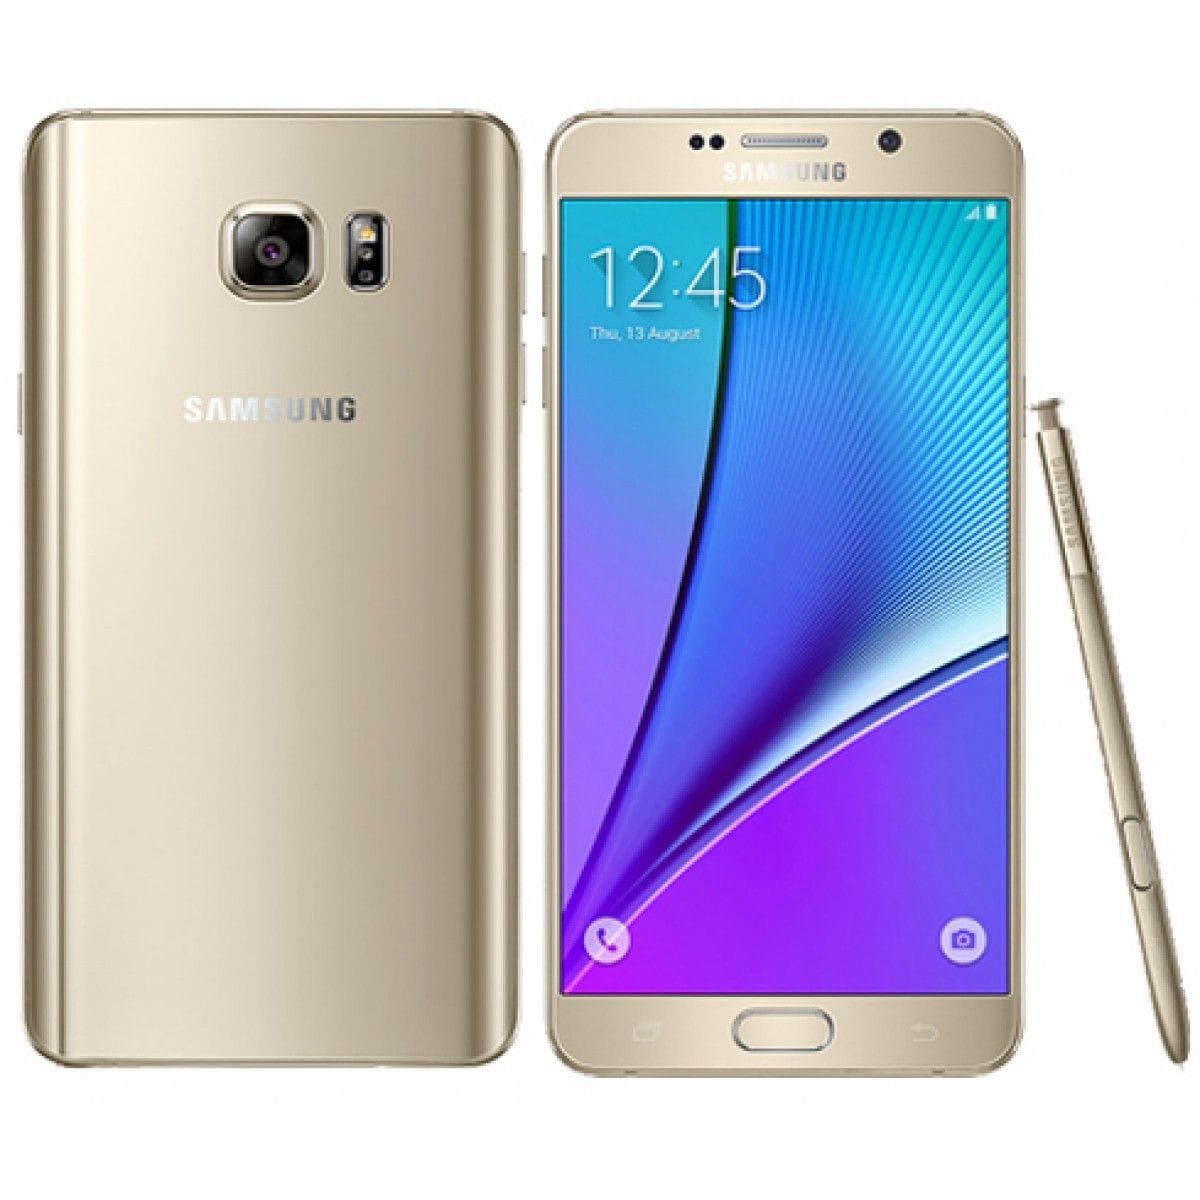 Samsung Galaxy Note5 - 64 GB - Platinum Gold - T-Mobile - GSM